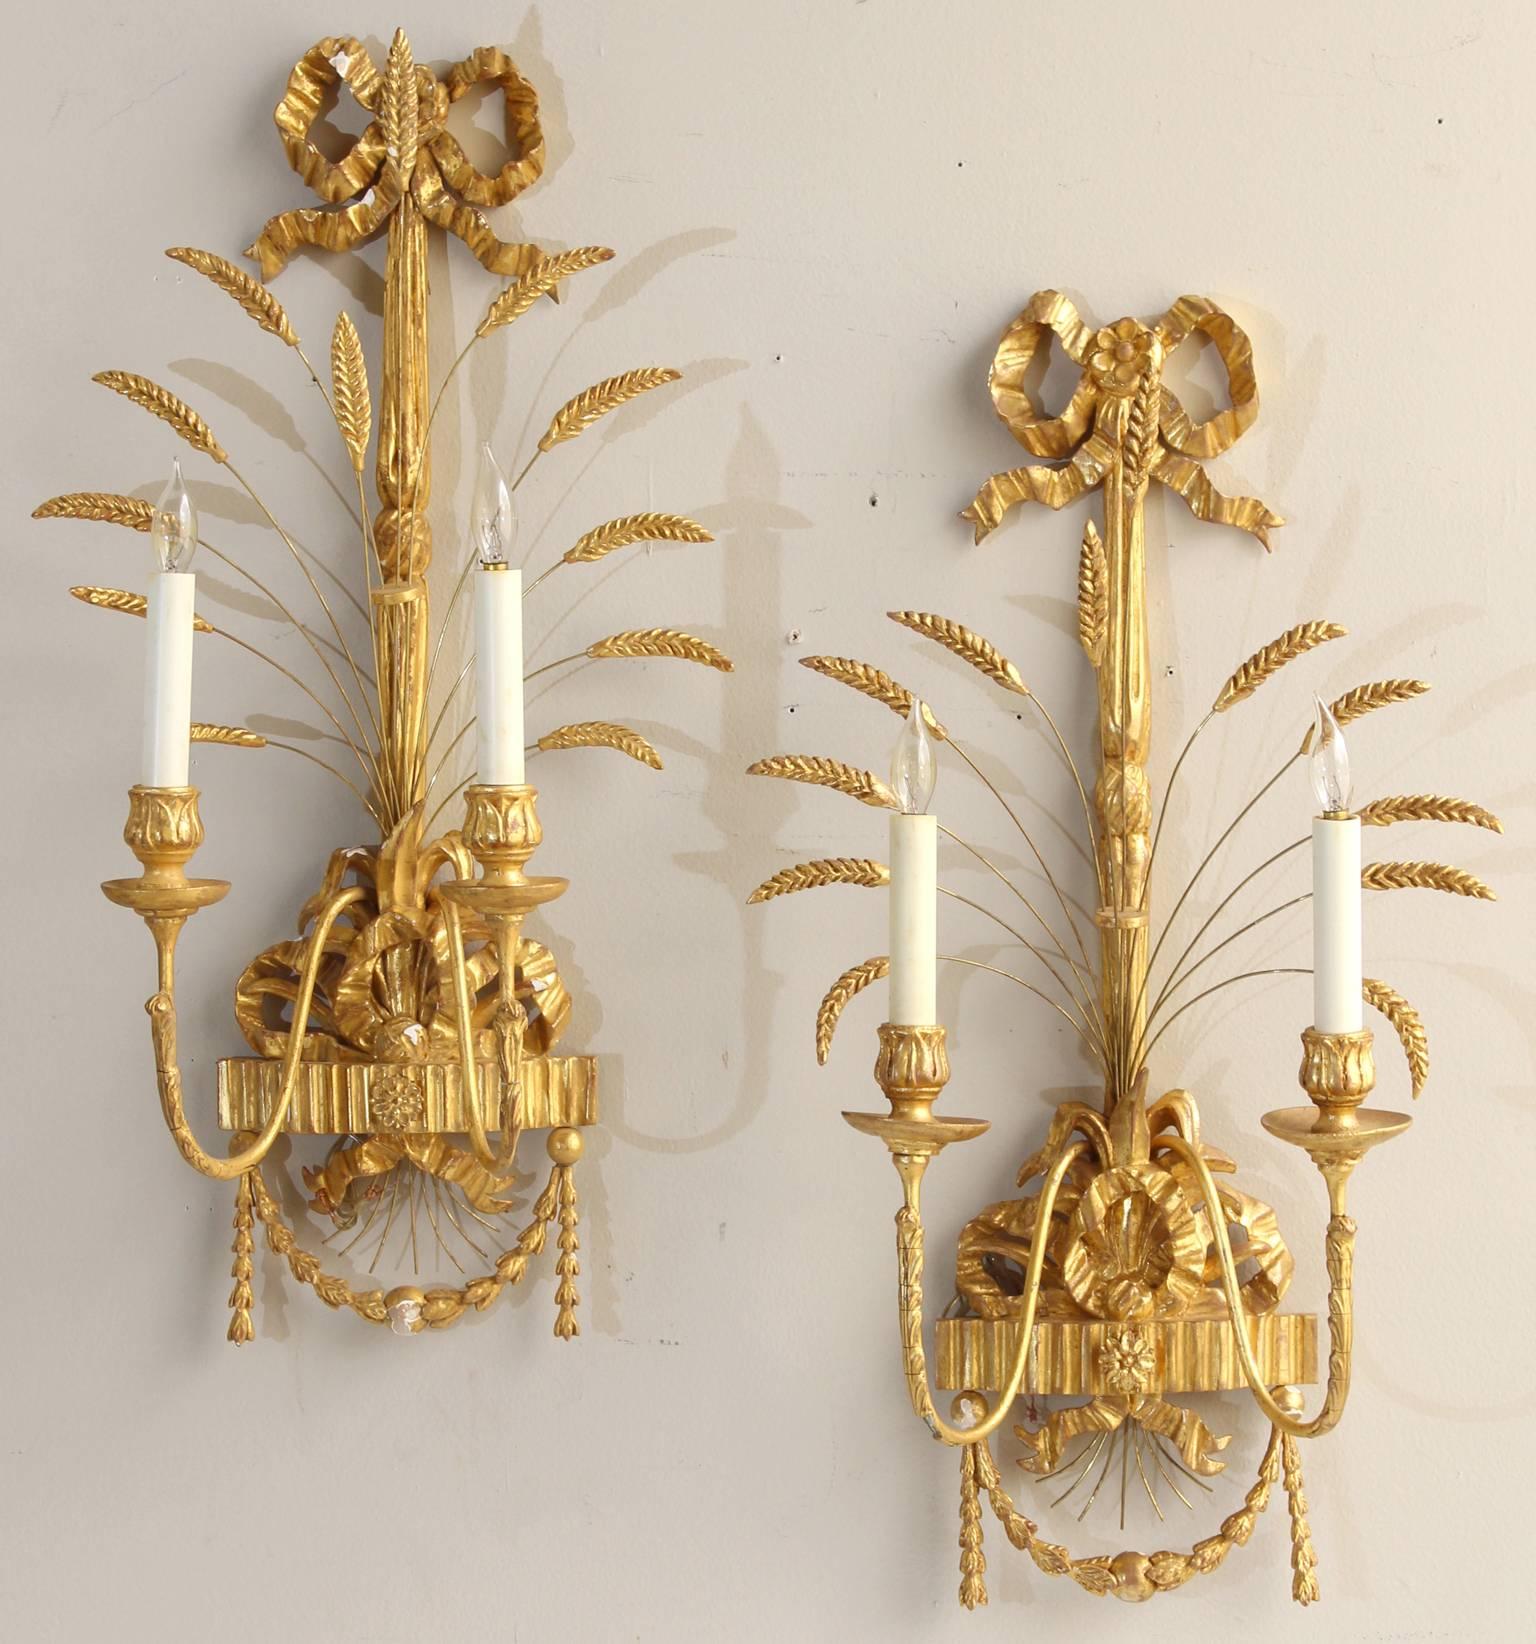 An elegant pair of Regency style carved wood and water gilt sconces wired for electricity.  